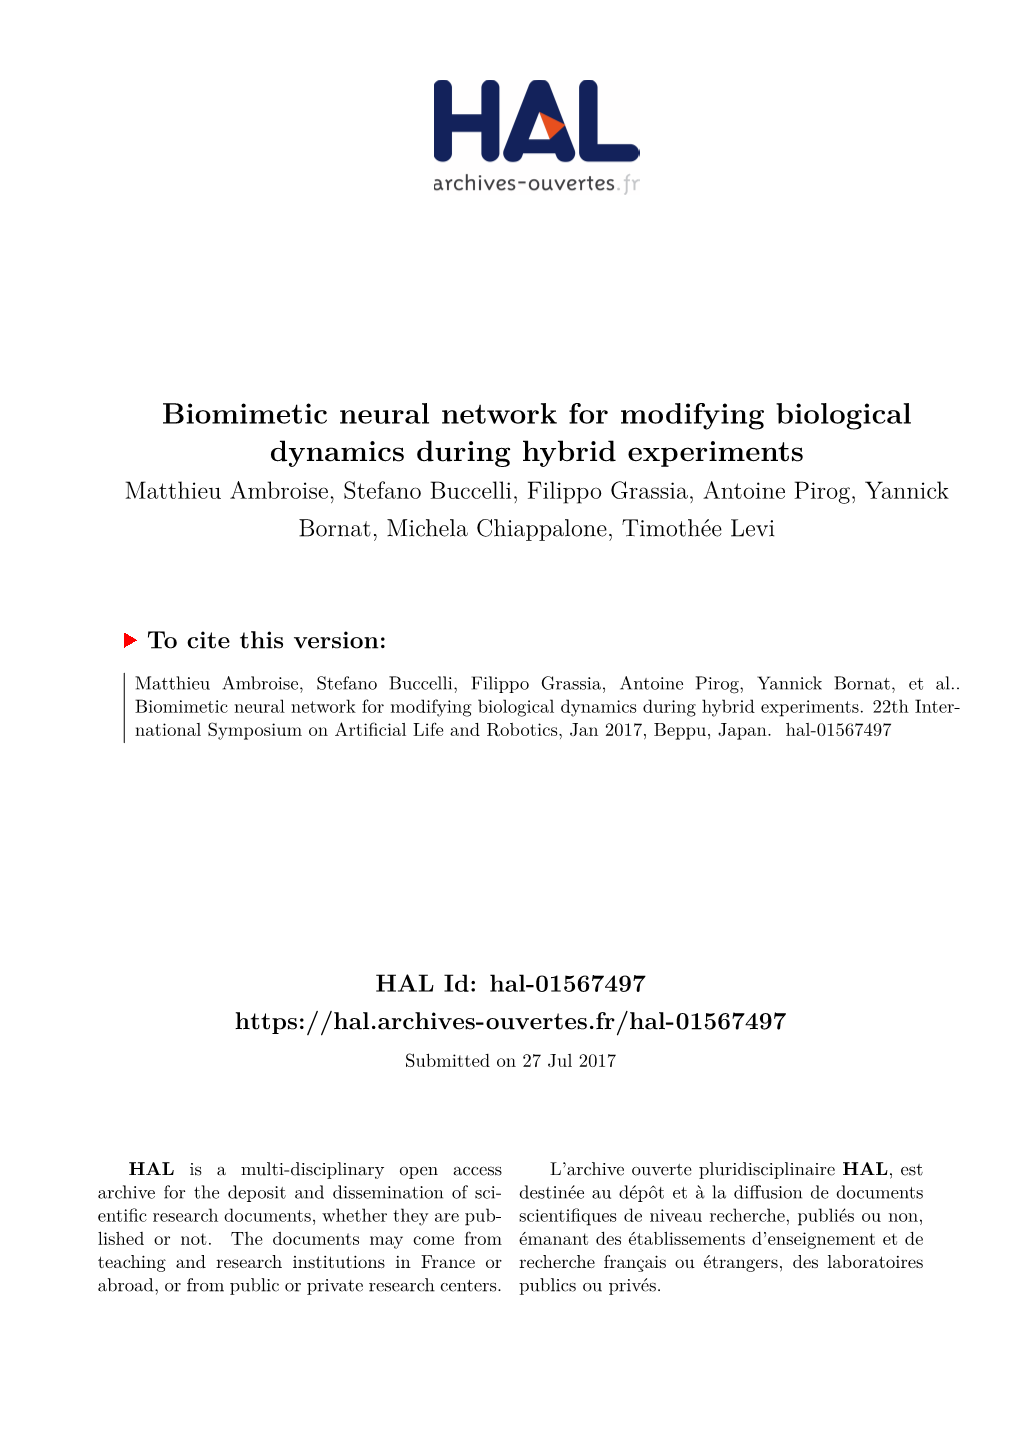 Biomimetic Neural Network for Modifying Biological Dynamics During Hybrid Experiments